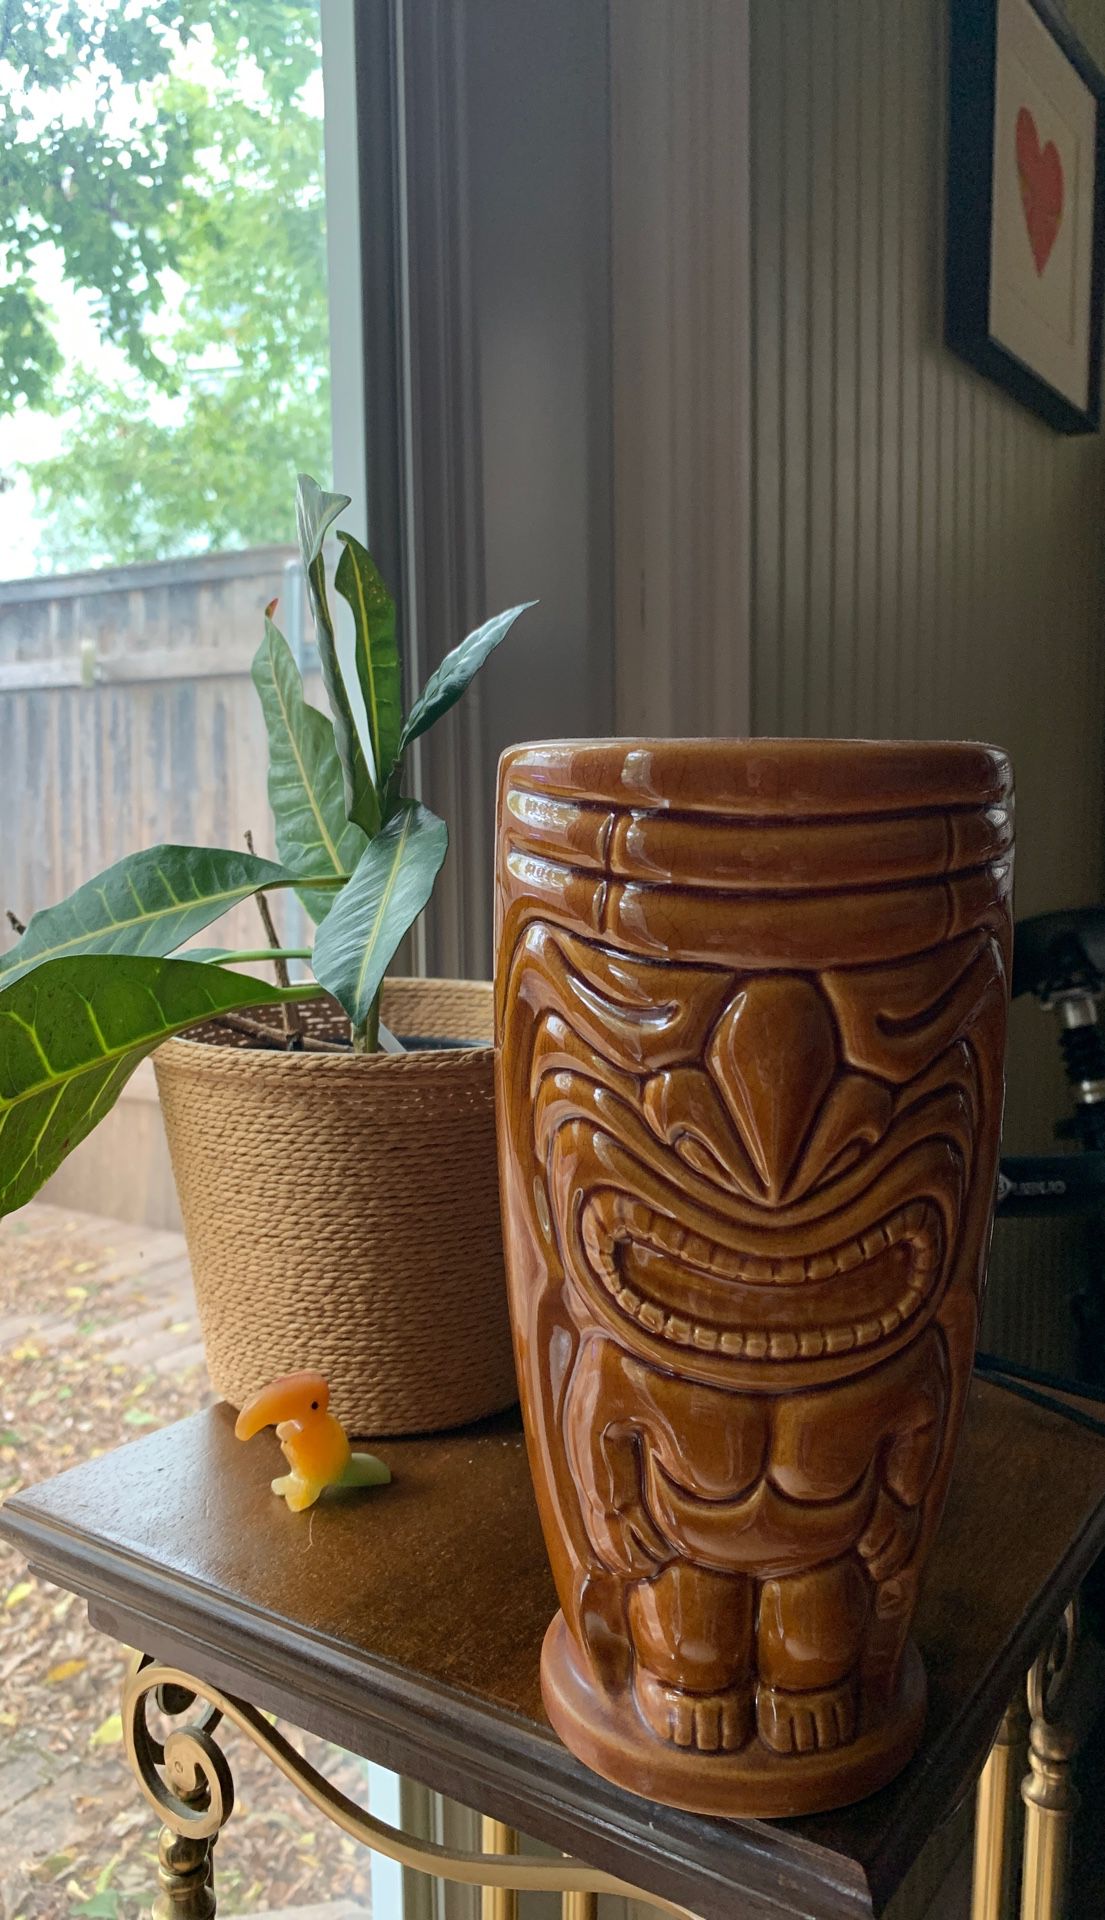 Tiki planter or flower pot. Perfect for cactus or tropical plant